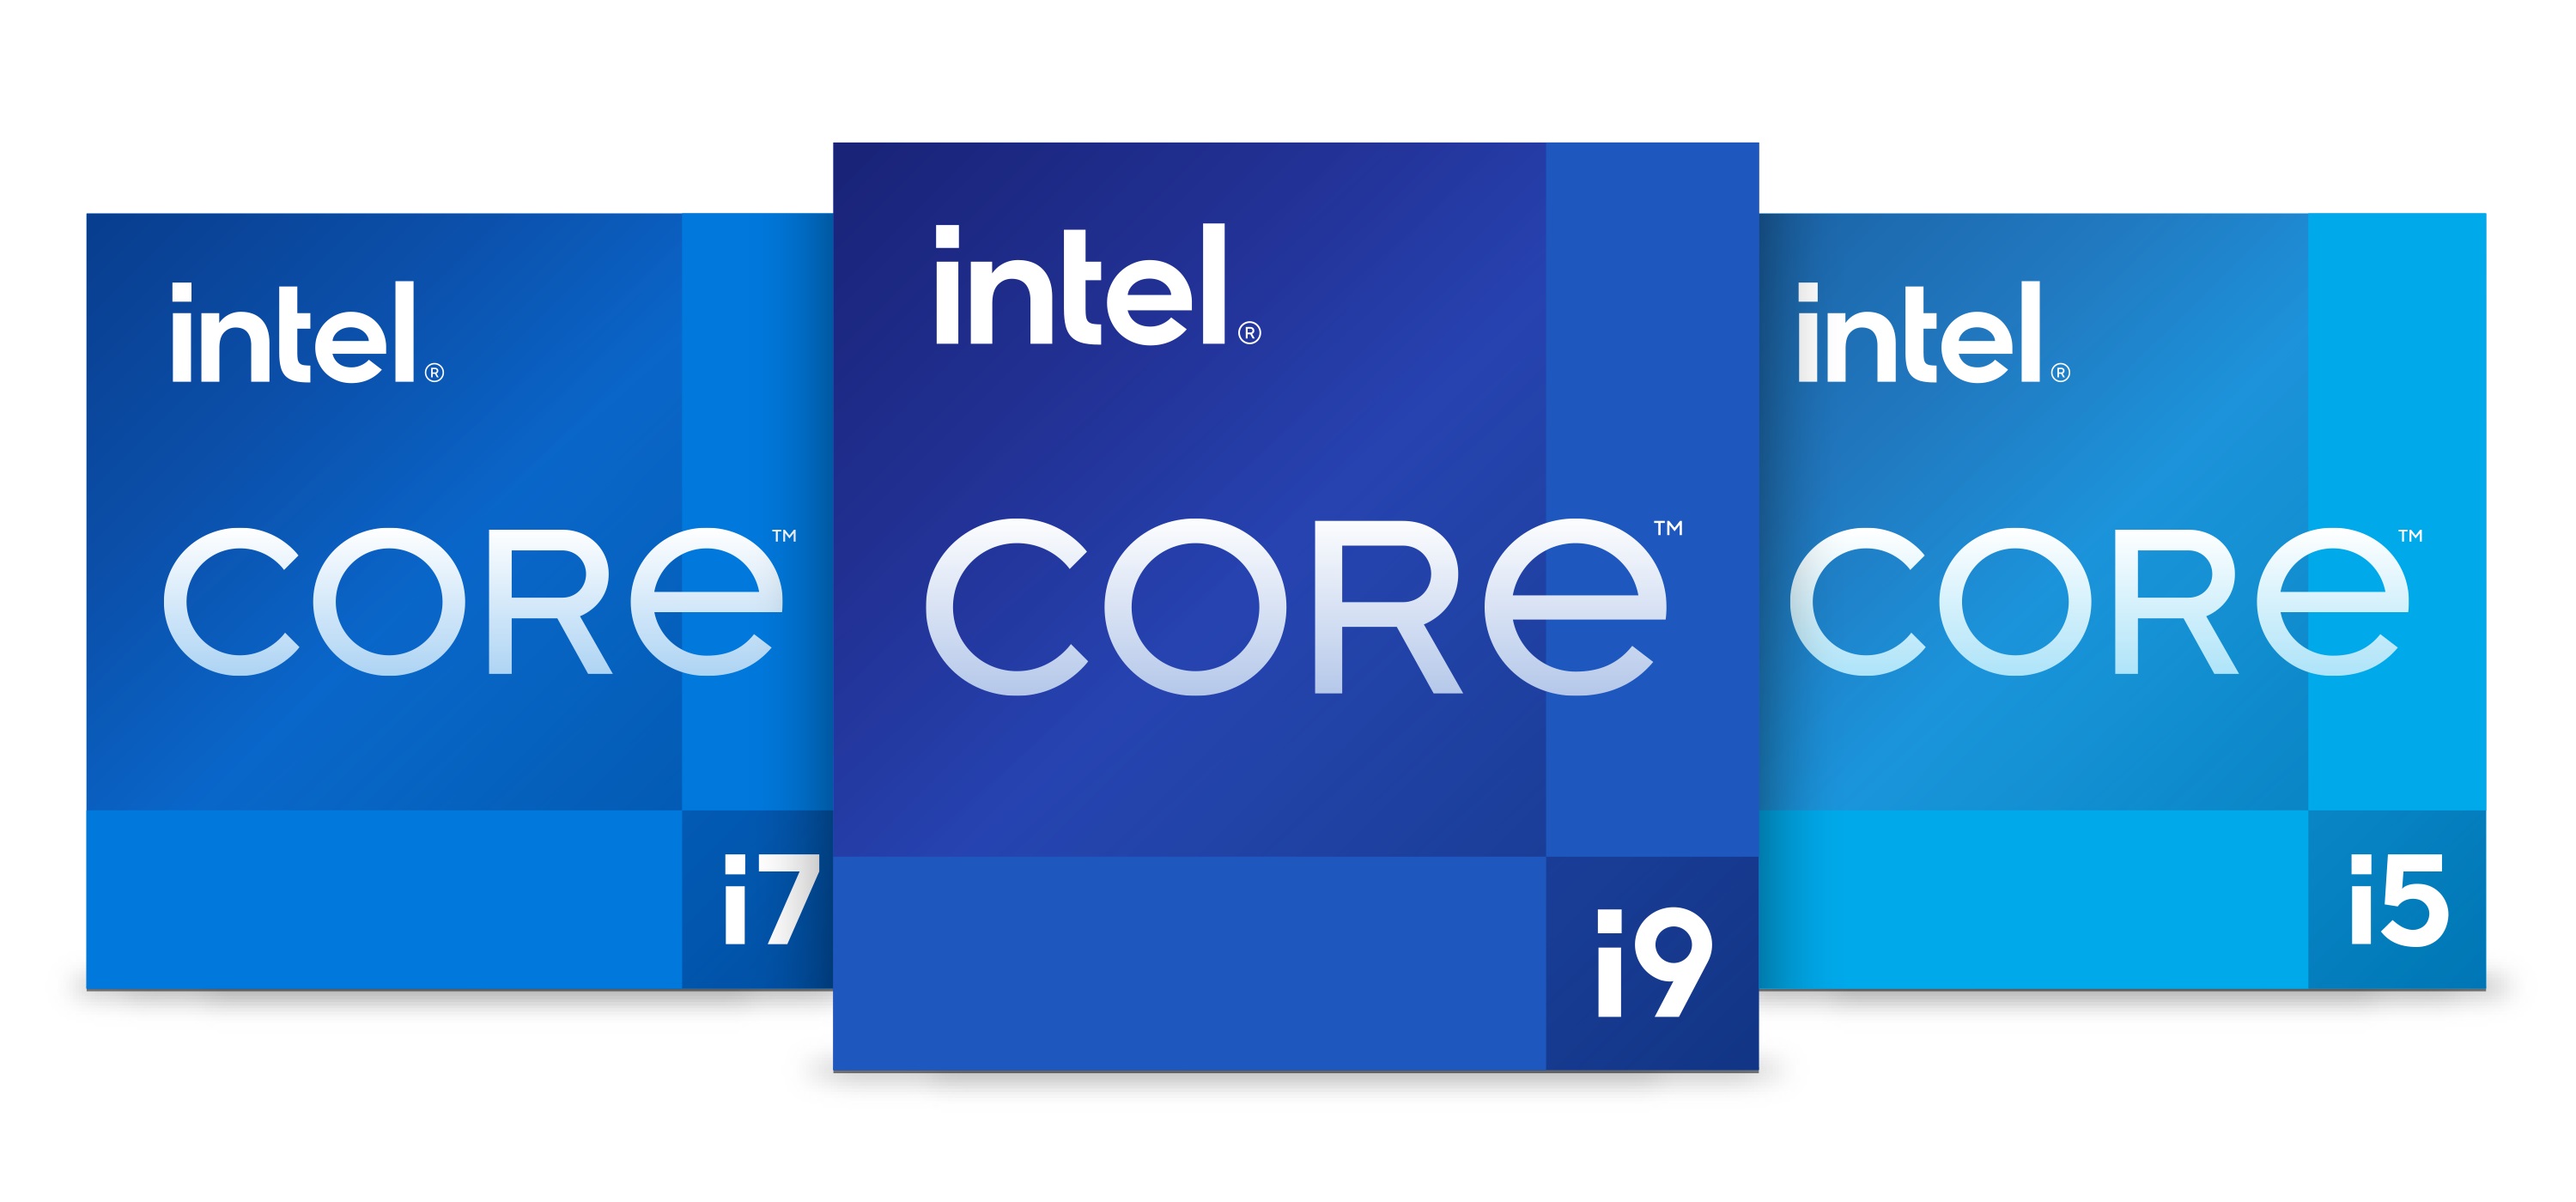 Intel unveils the 12th Gen Intel Core processor family with the launch of six new unlocked desktop processors, based on Intel’s performance hybrid architecture. The new six unlocked desktop processors were introduced Oct. 27, 2021. (Credit: Intel Corporation)